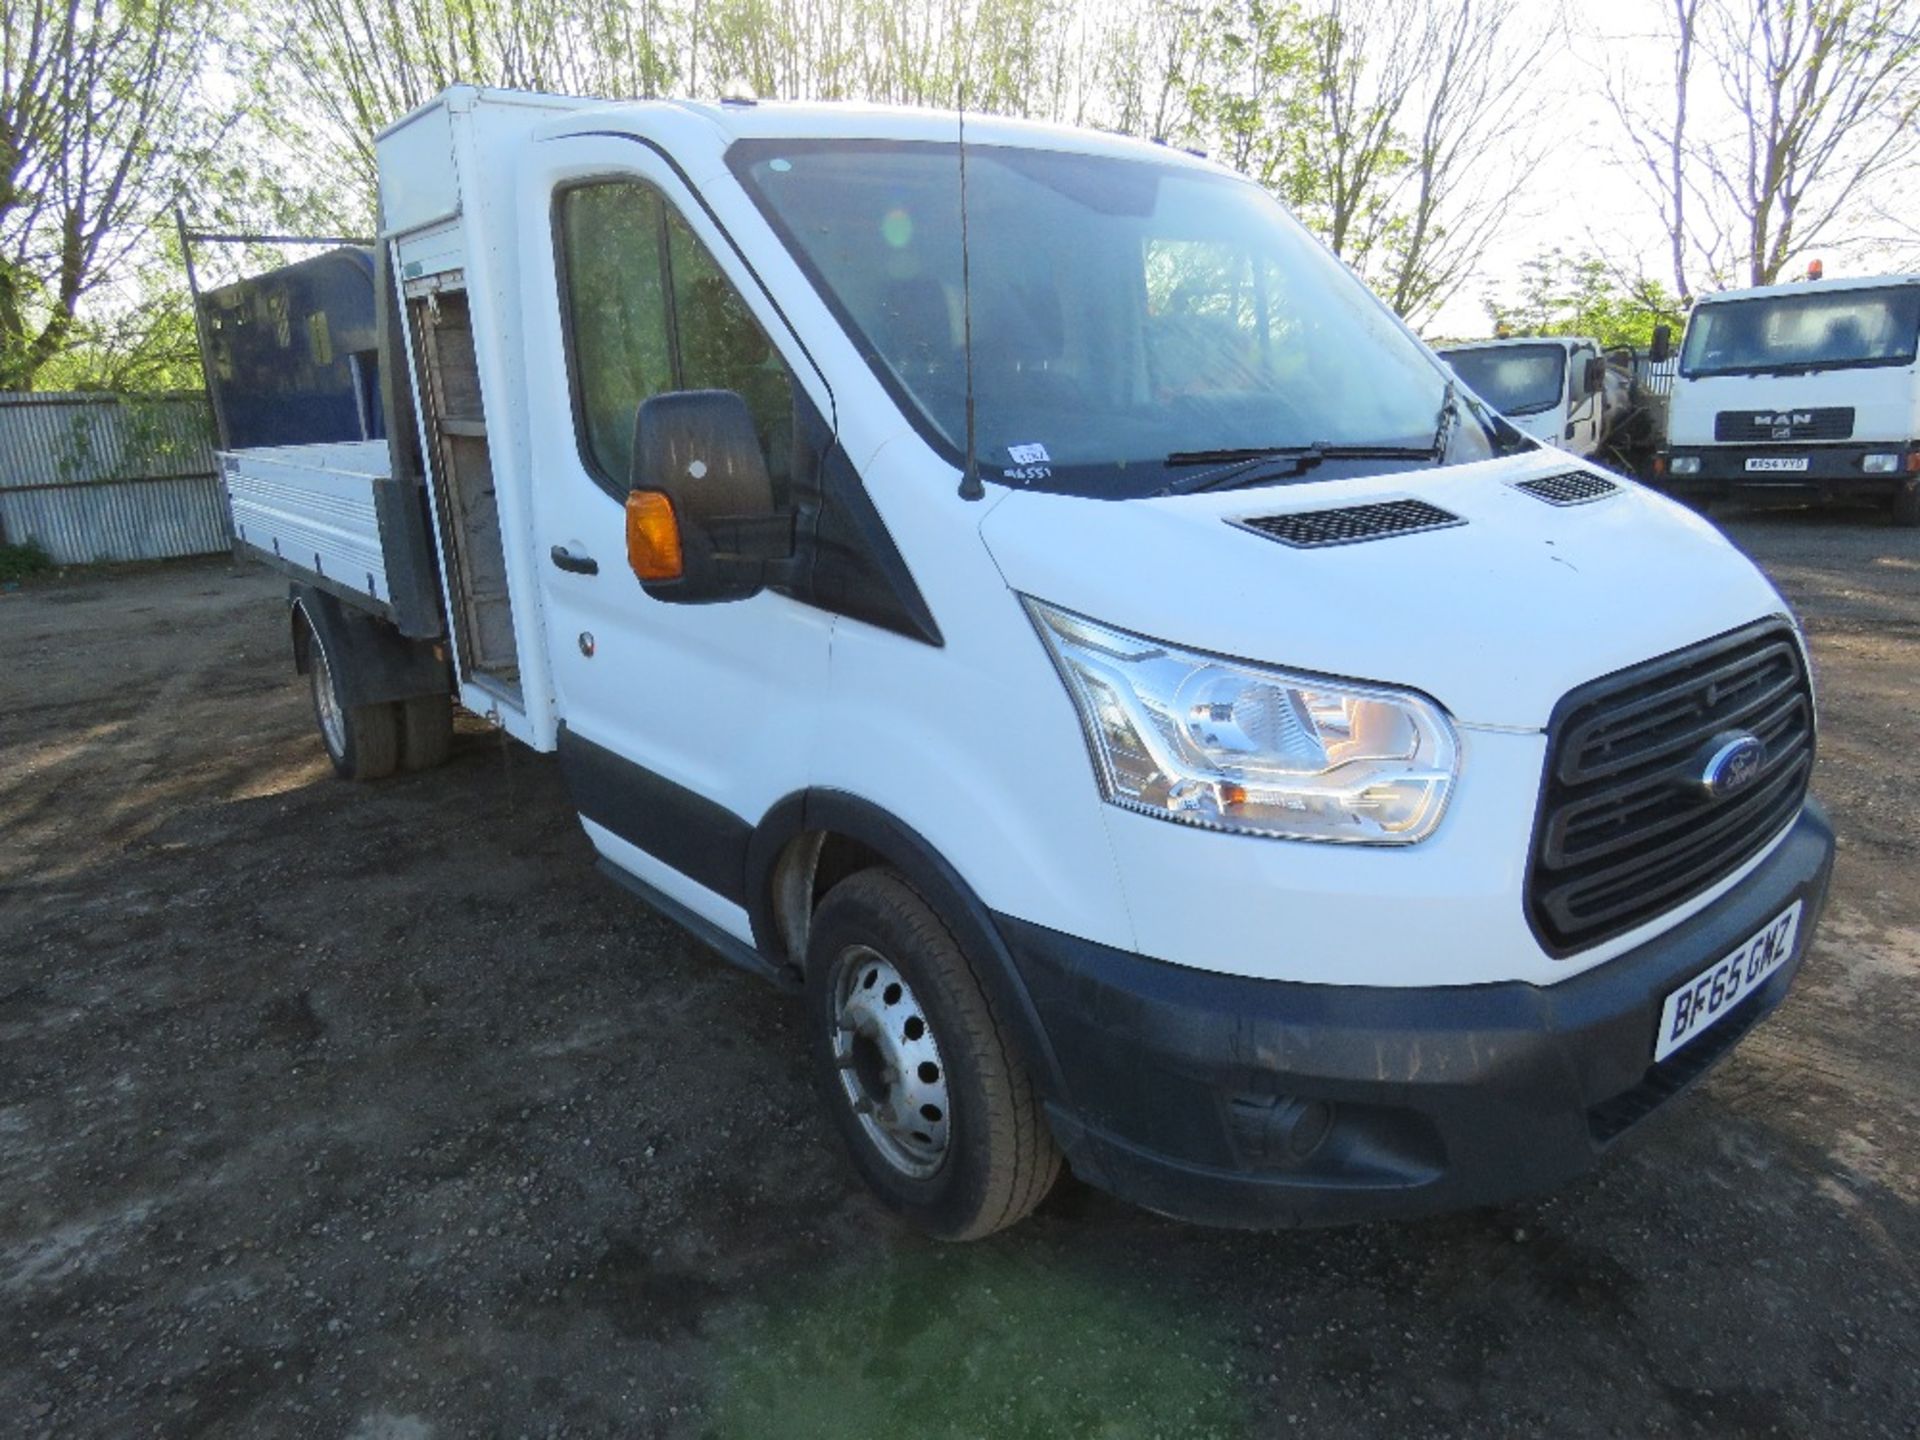 FORD TRANSIT TIPPER TRUCK WITH TOOL STORAGE LOCKER REG:BF65 GMZ. WITH V5 AND MOT UNTIL15.04.25. FIRS